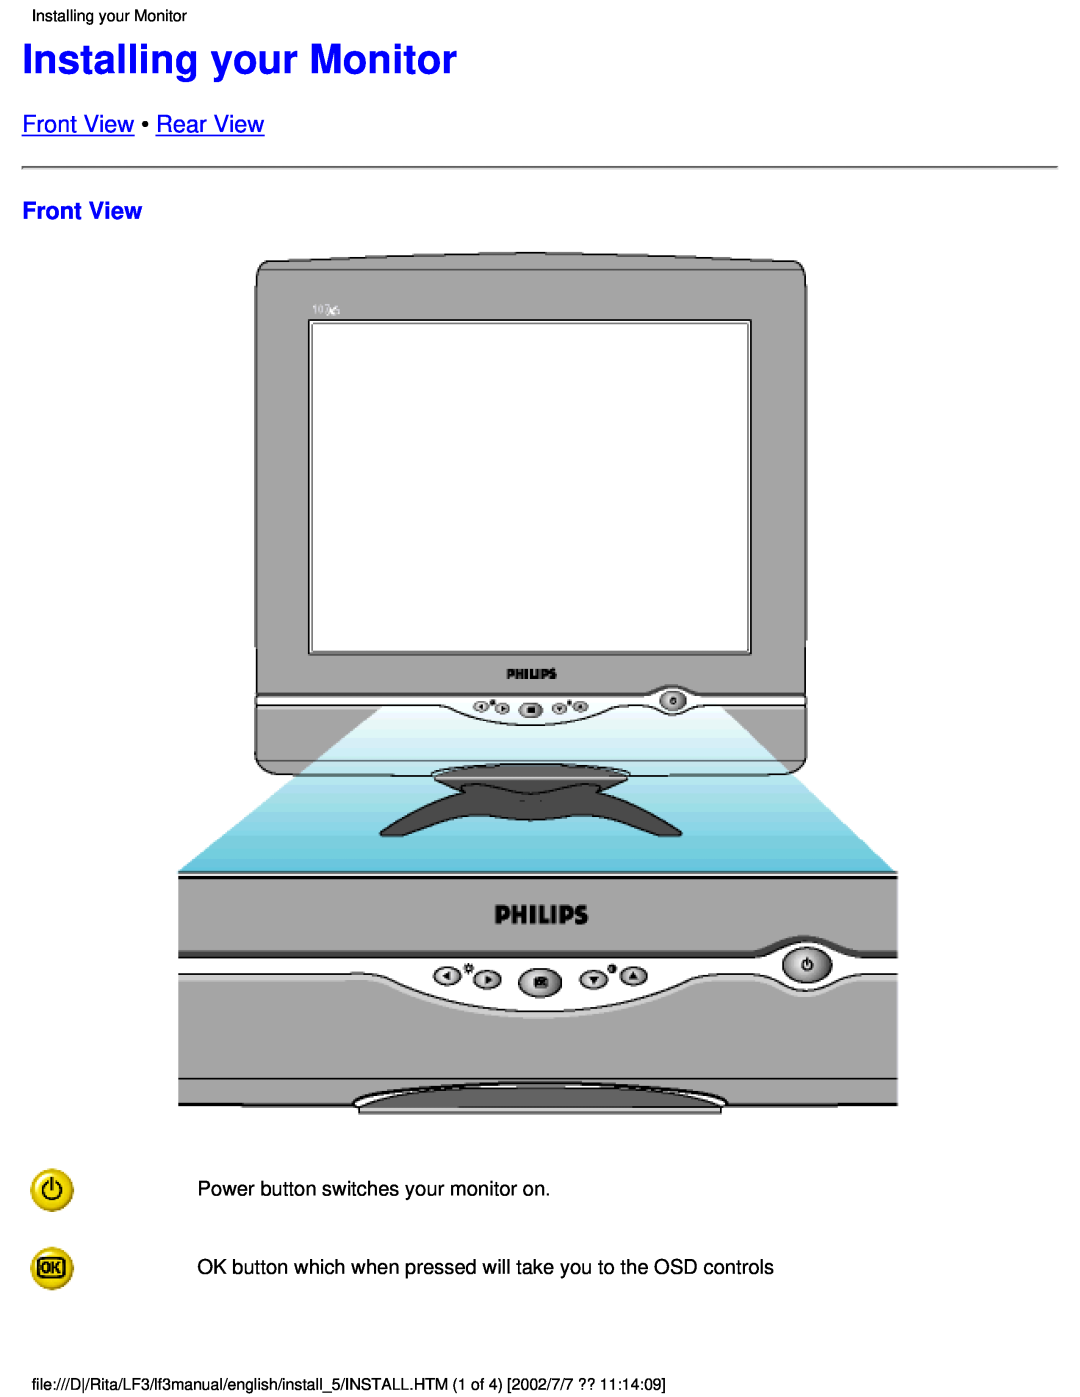 Philips 170X user manual Installing your Monitor, Front View Rear View 